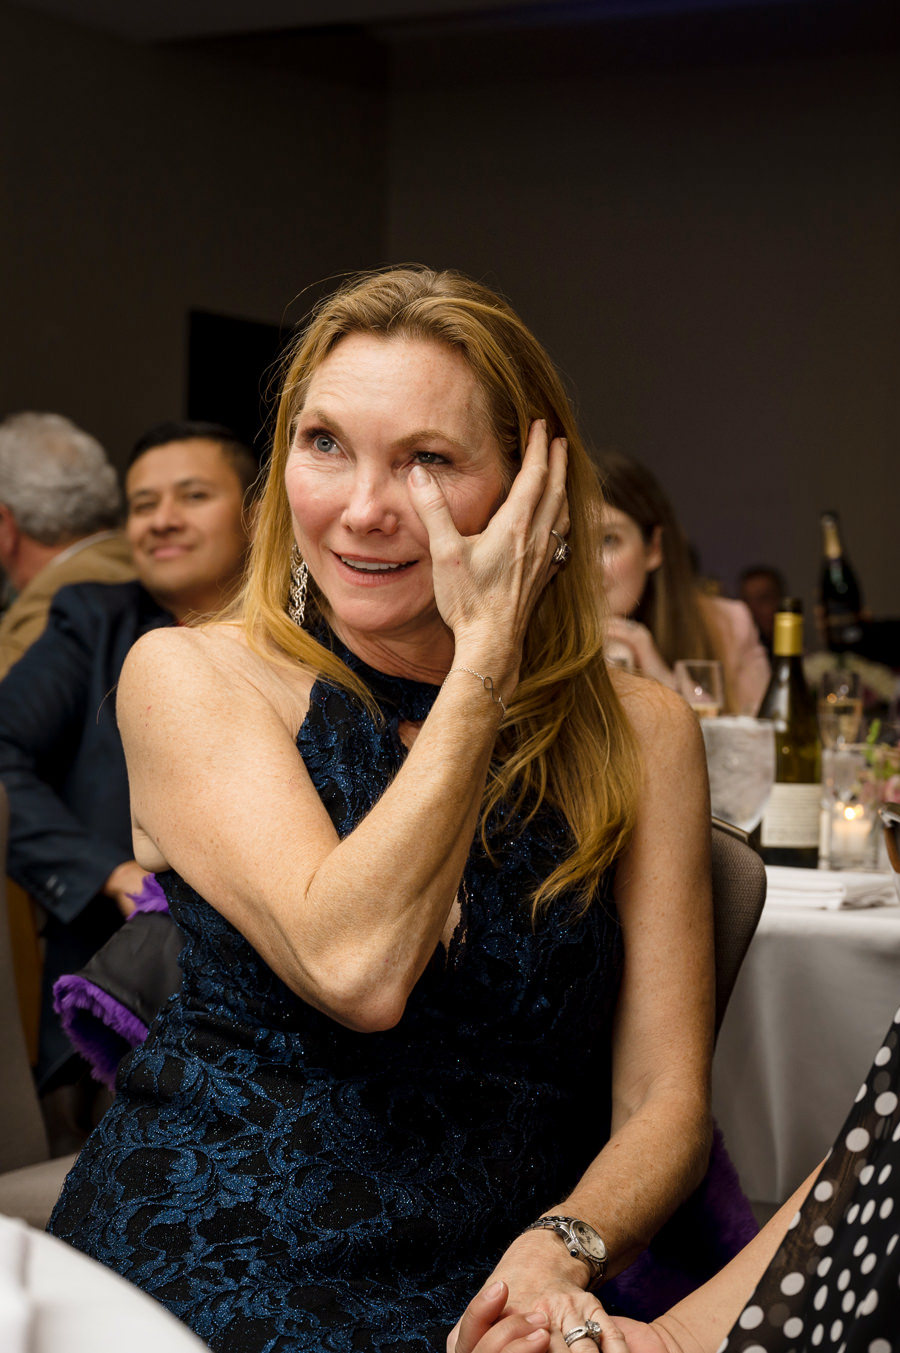 An image of a female overcome with emotion while listening to a speech on her Birthday party at Hotel Valencia